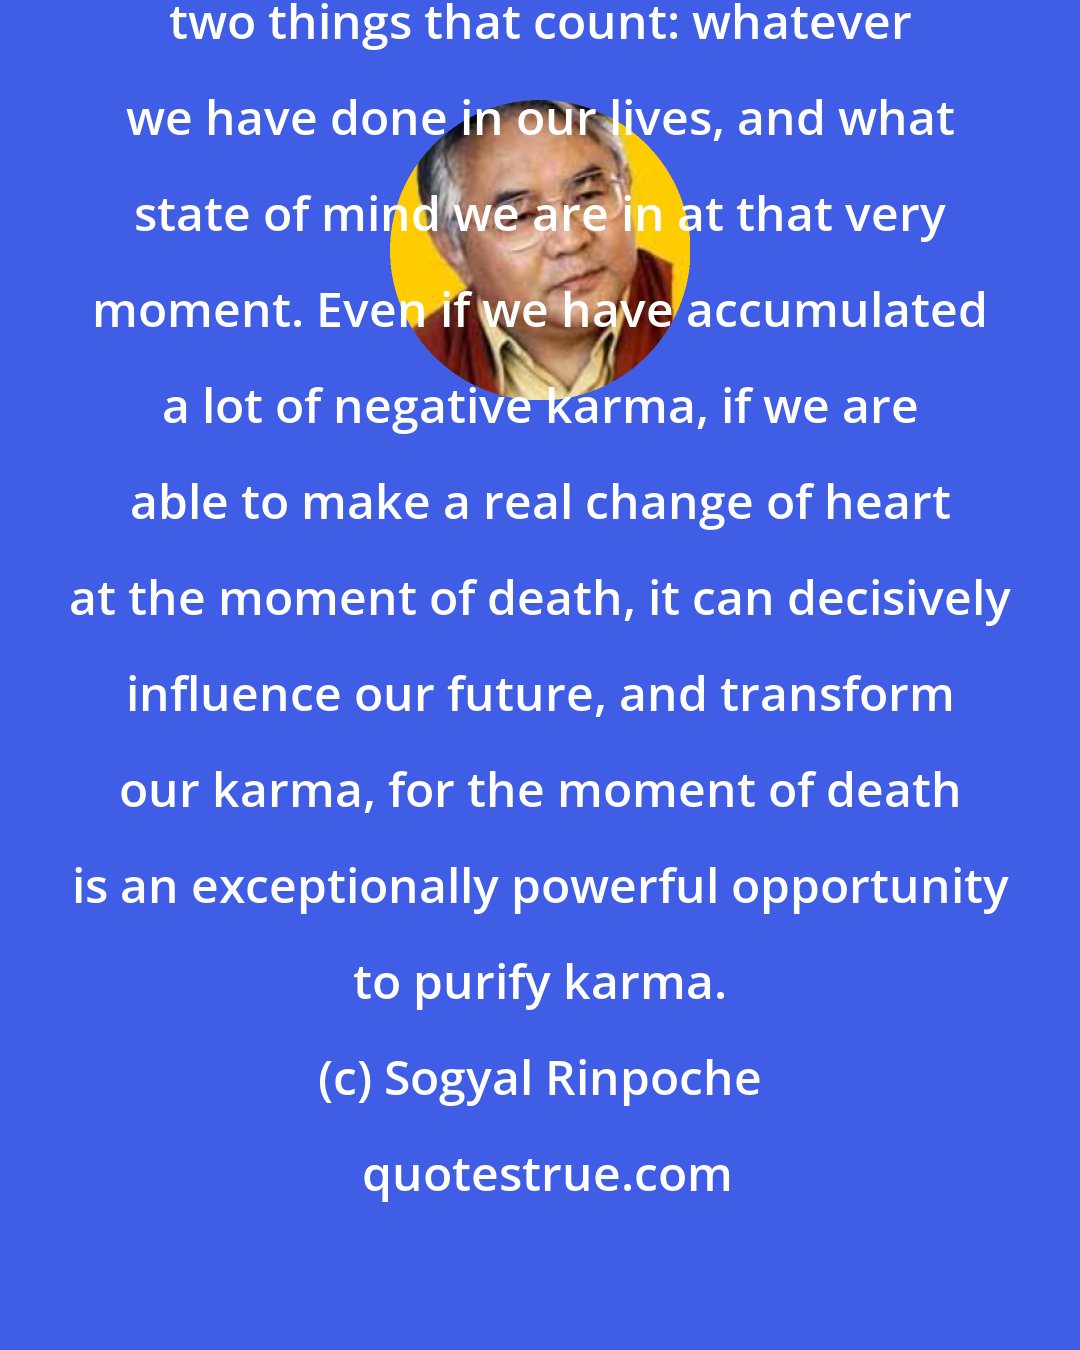 Sogyal Rinpoche: At the moment of death, there are two things that count: whatever we have done in our lives, and what state of mind we are in at that very moment. Even if we have accumulated a lot of negative karma, if we are able to make a real change of heart at the moment of death, it can decisively influence our future, and transform our karma, for the moment of death is an exceptionally powerful opportunity to purify karma.